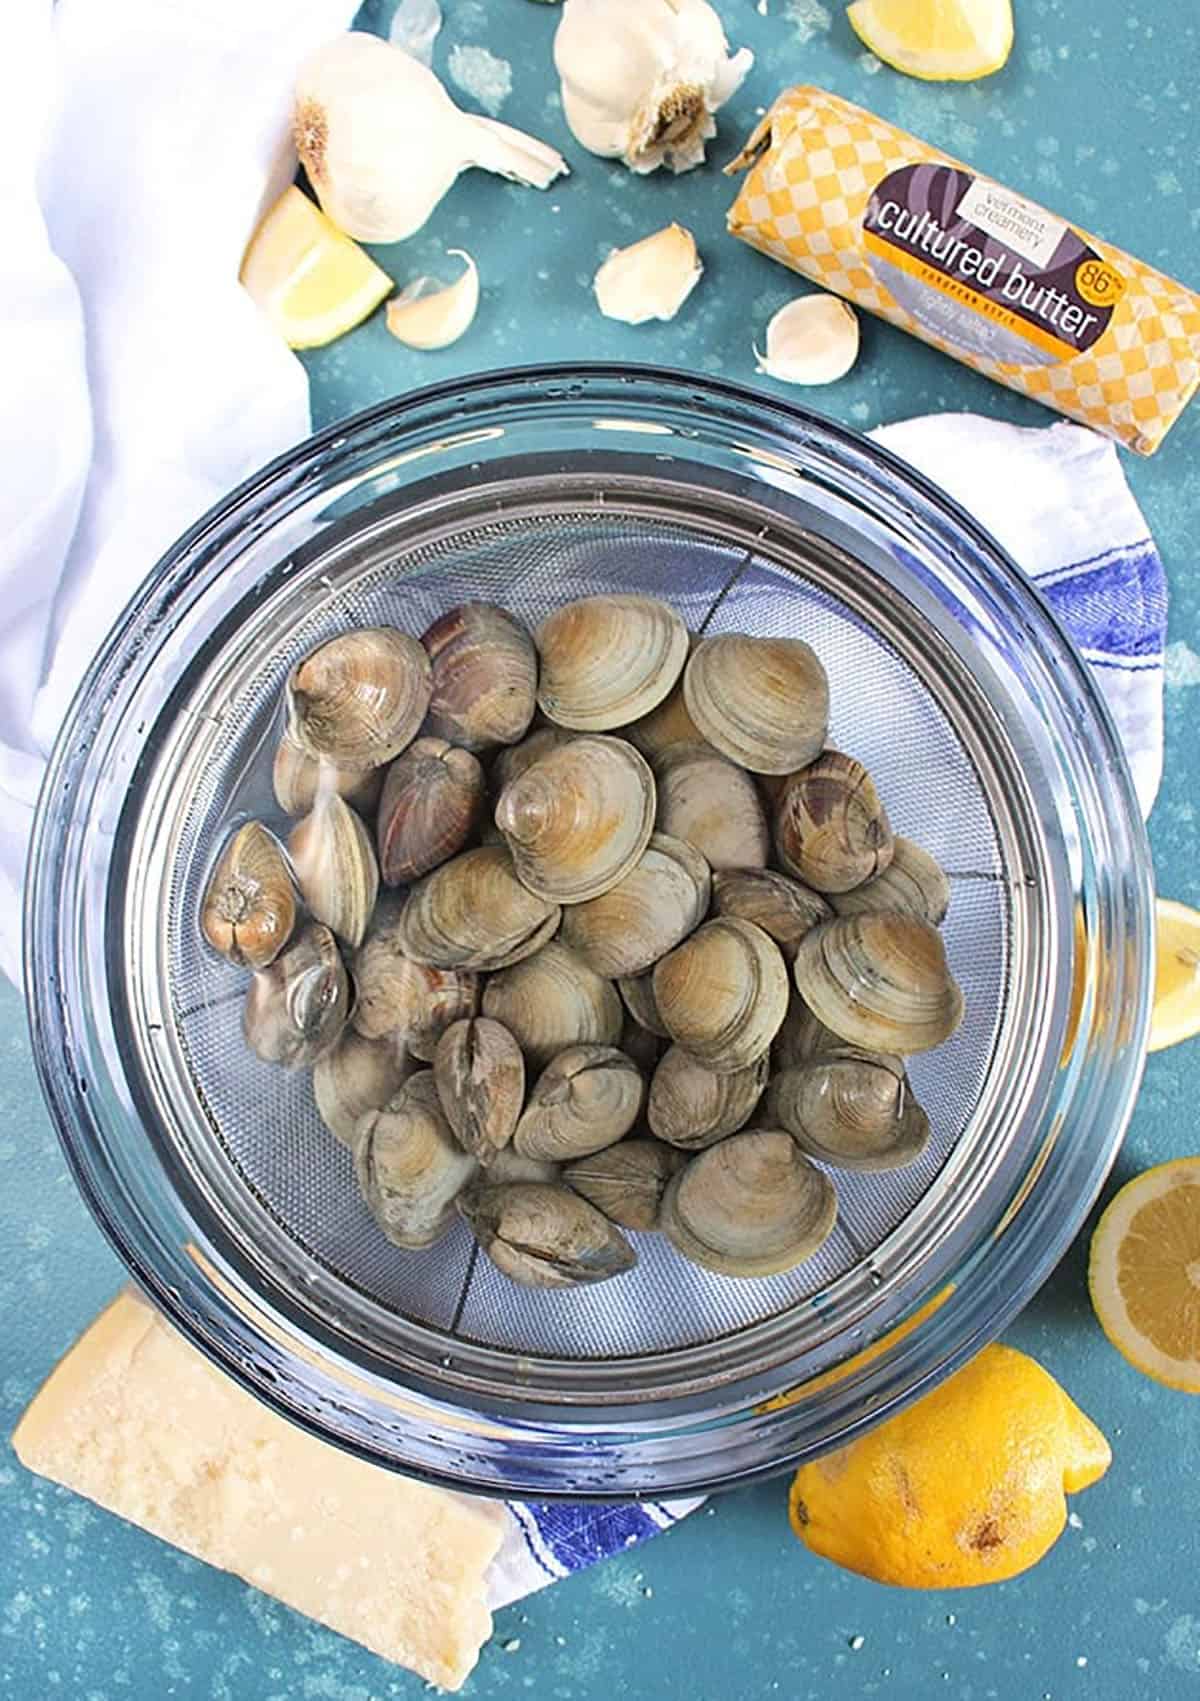 Clams soaking in a glass bowl with water.